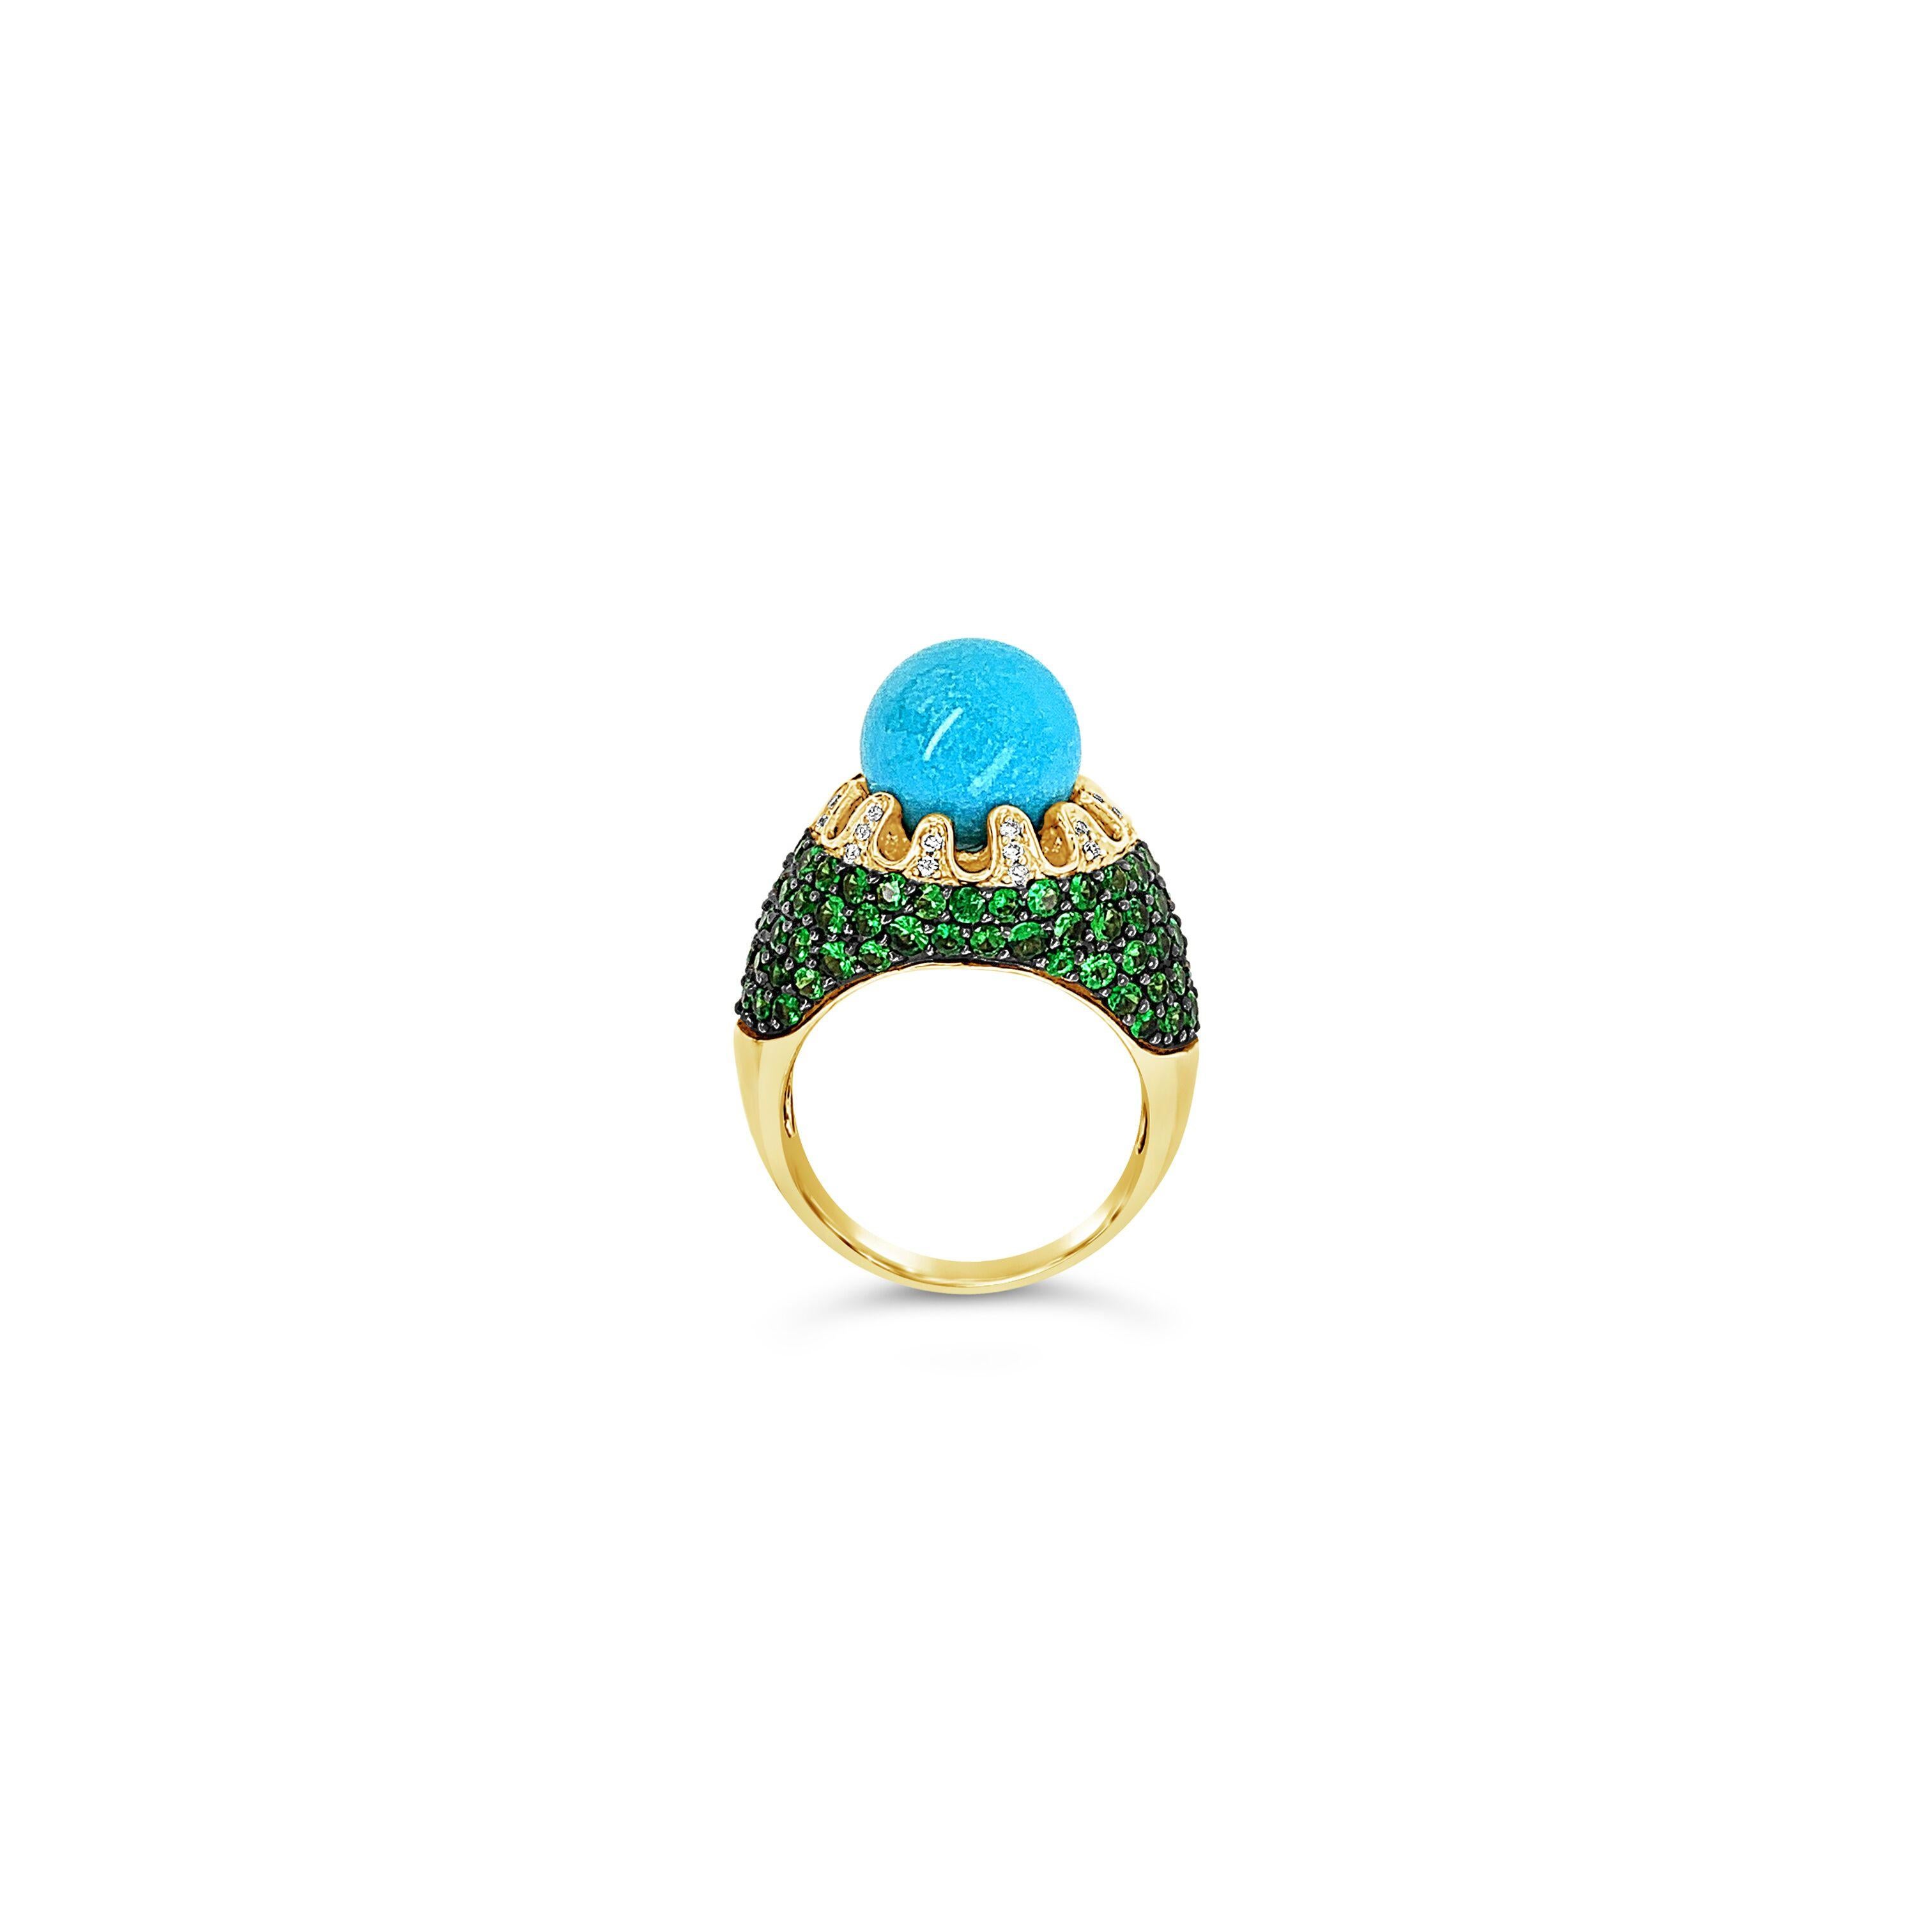 Carlo Viani® Ring featuring 9 1/5 cts. Robins Egg Blue Turquoise™, 3 1/6 cts. Forest Green Tsavorite™, 1/8 cts. Vanilla Diamonds® set in 14K Honey Gold™

Ring may or may not be sizable, please feel free to reach out with any questions!

Item comes